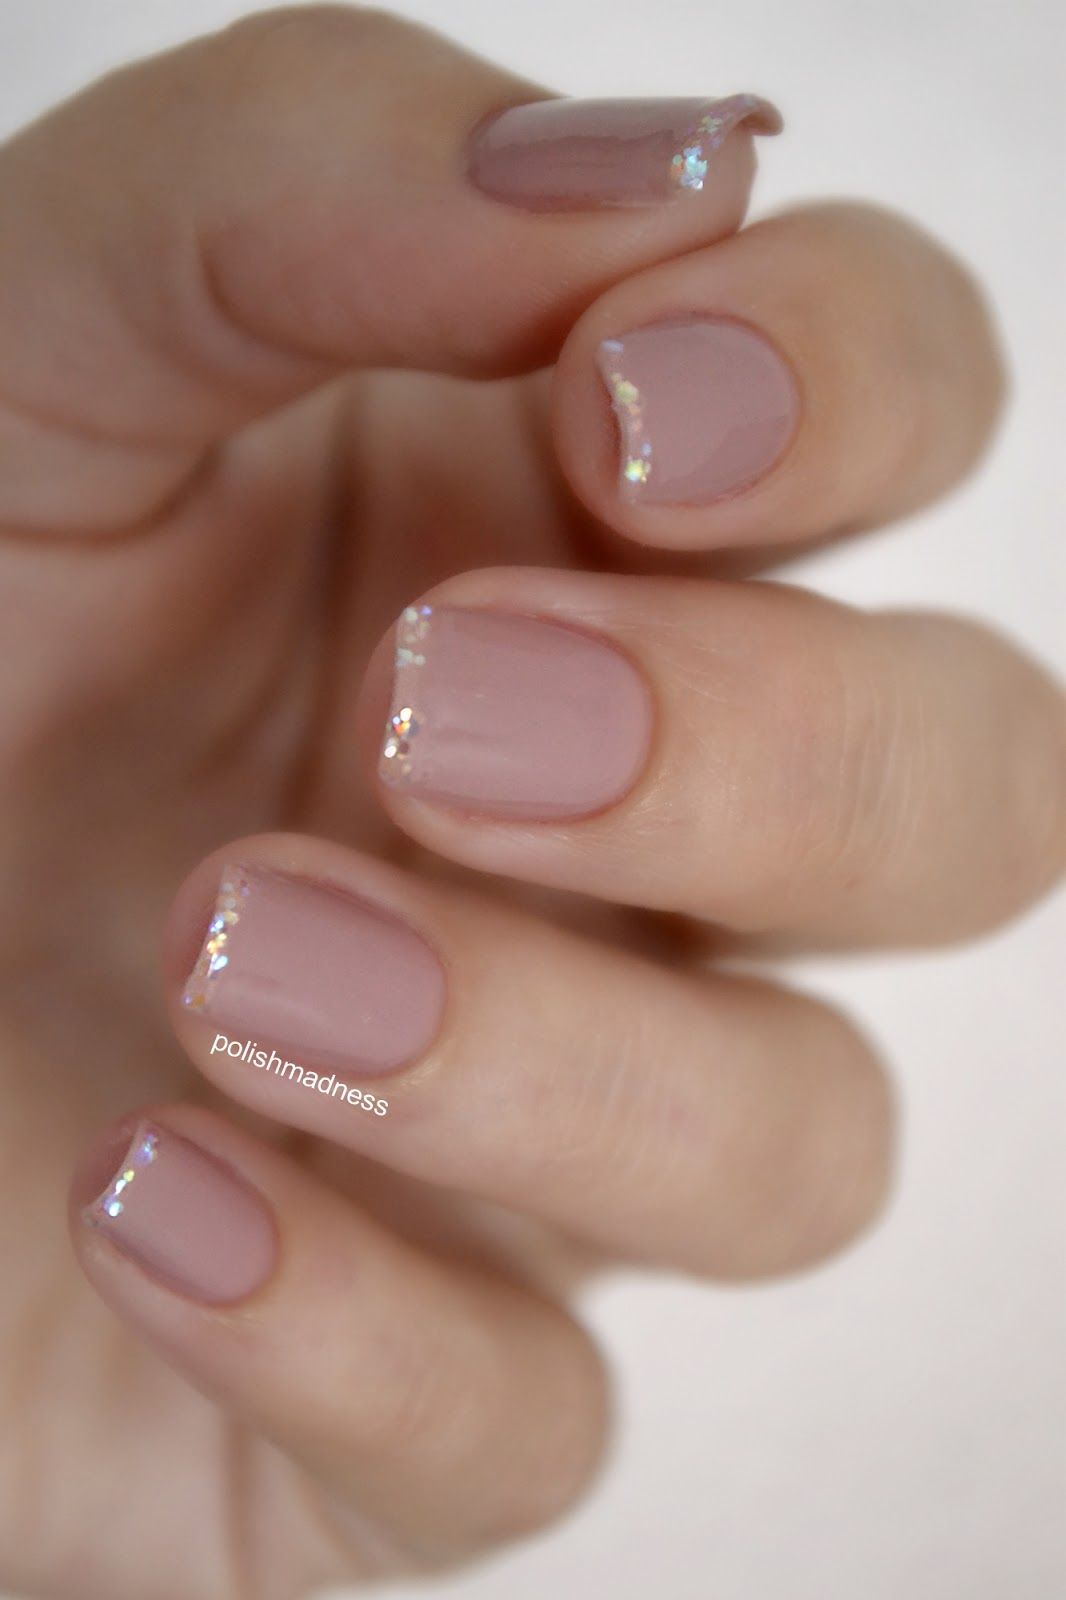 Barely there nude French nails